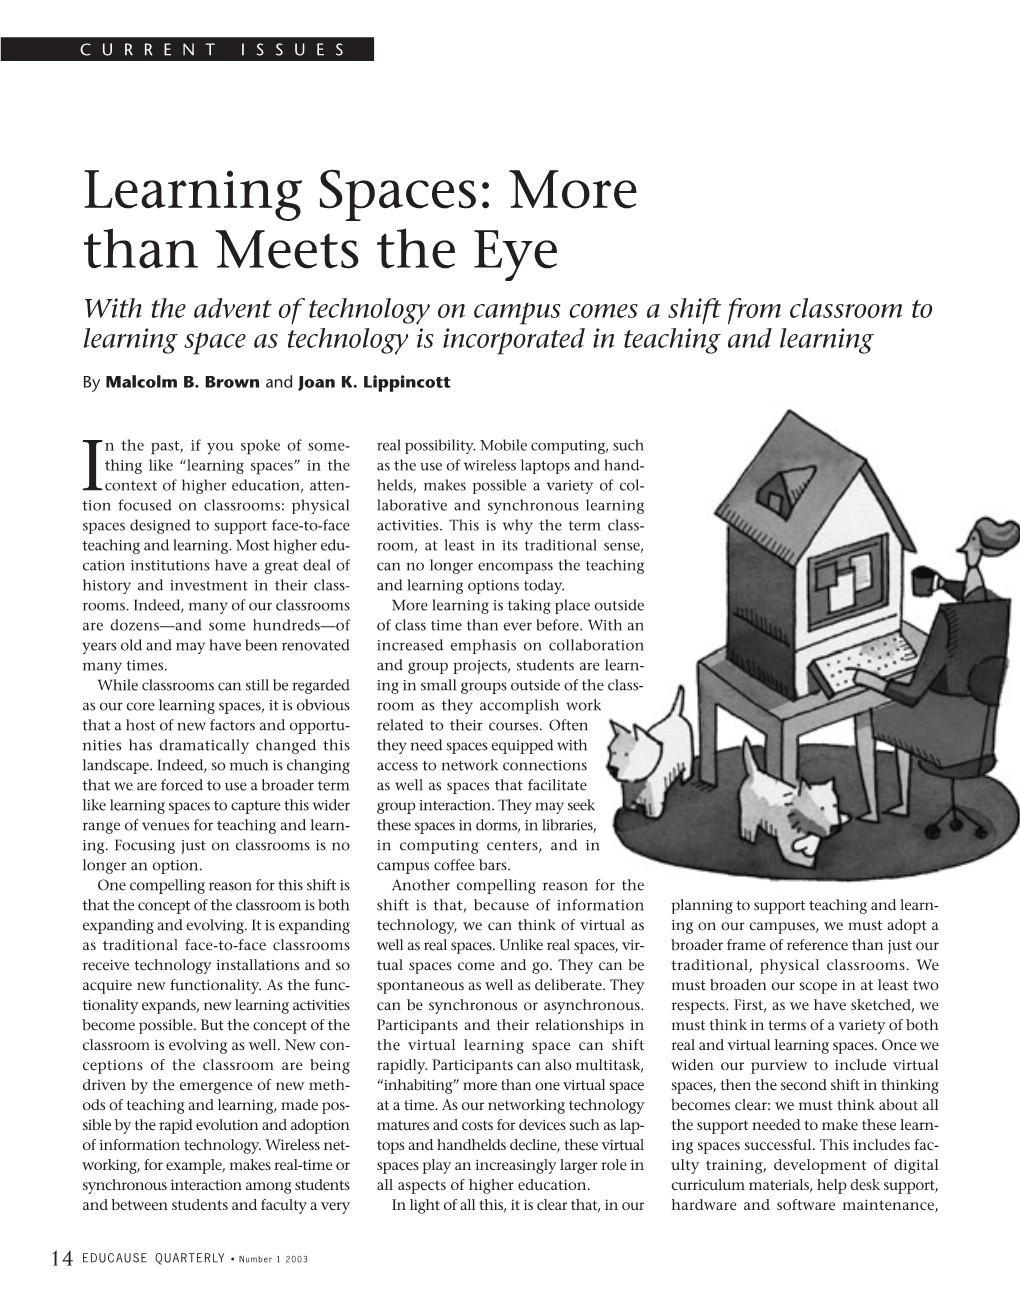 Learning Spaces: More Than Meets The